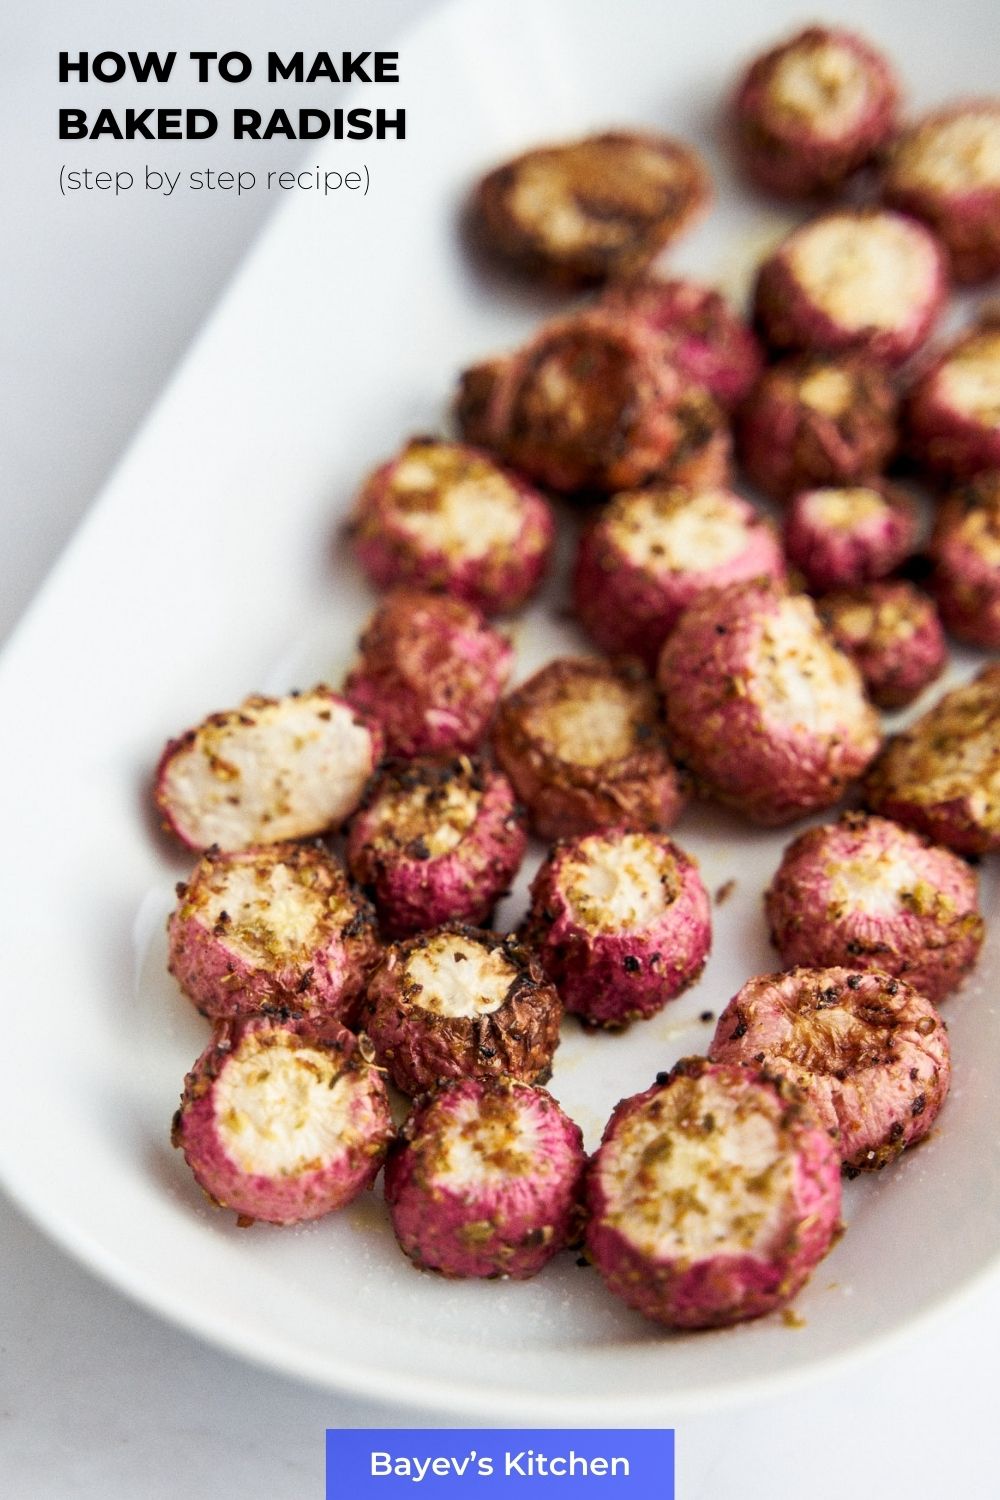 Baked radishes in the oven, recipe with step-by-step instructions and photos. Quick and easy dishes for every day